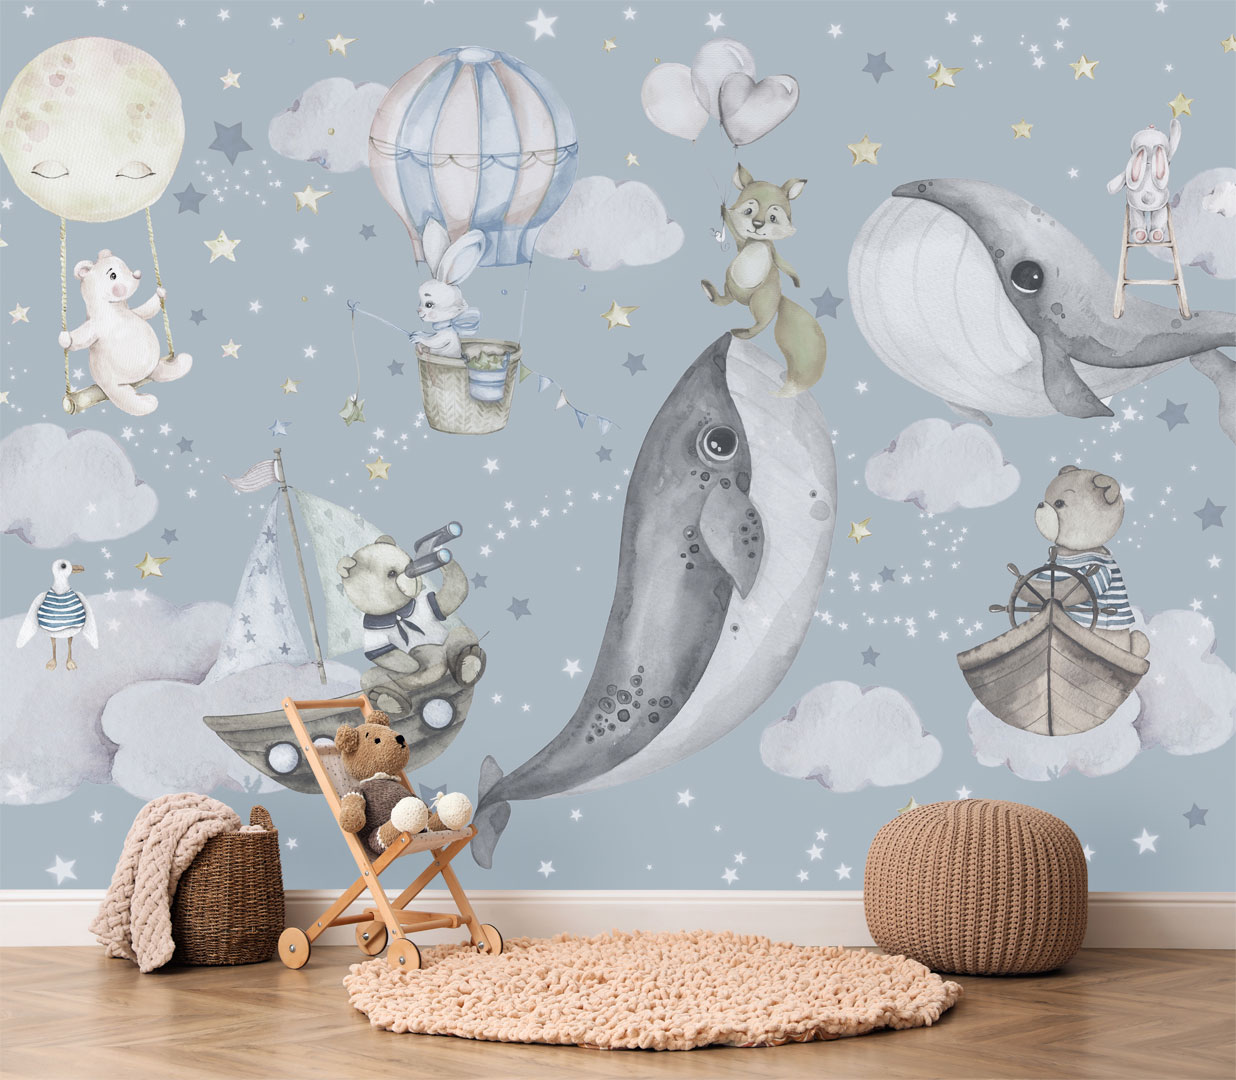 Children's wallpaper for boy or girl, with whales and animals in the clouds, star hunting - Dekoori image 2